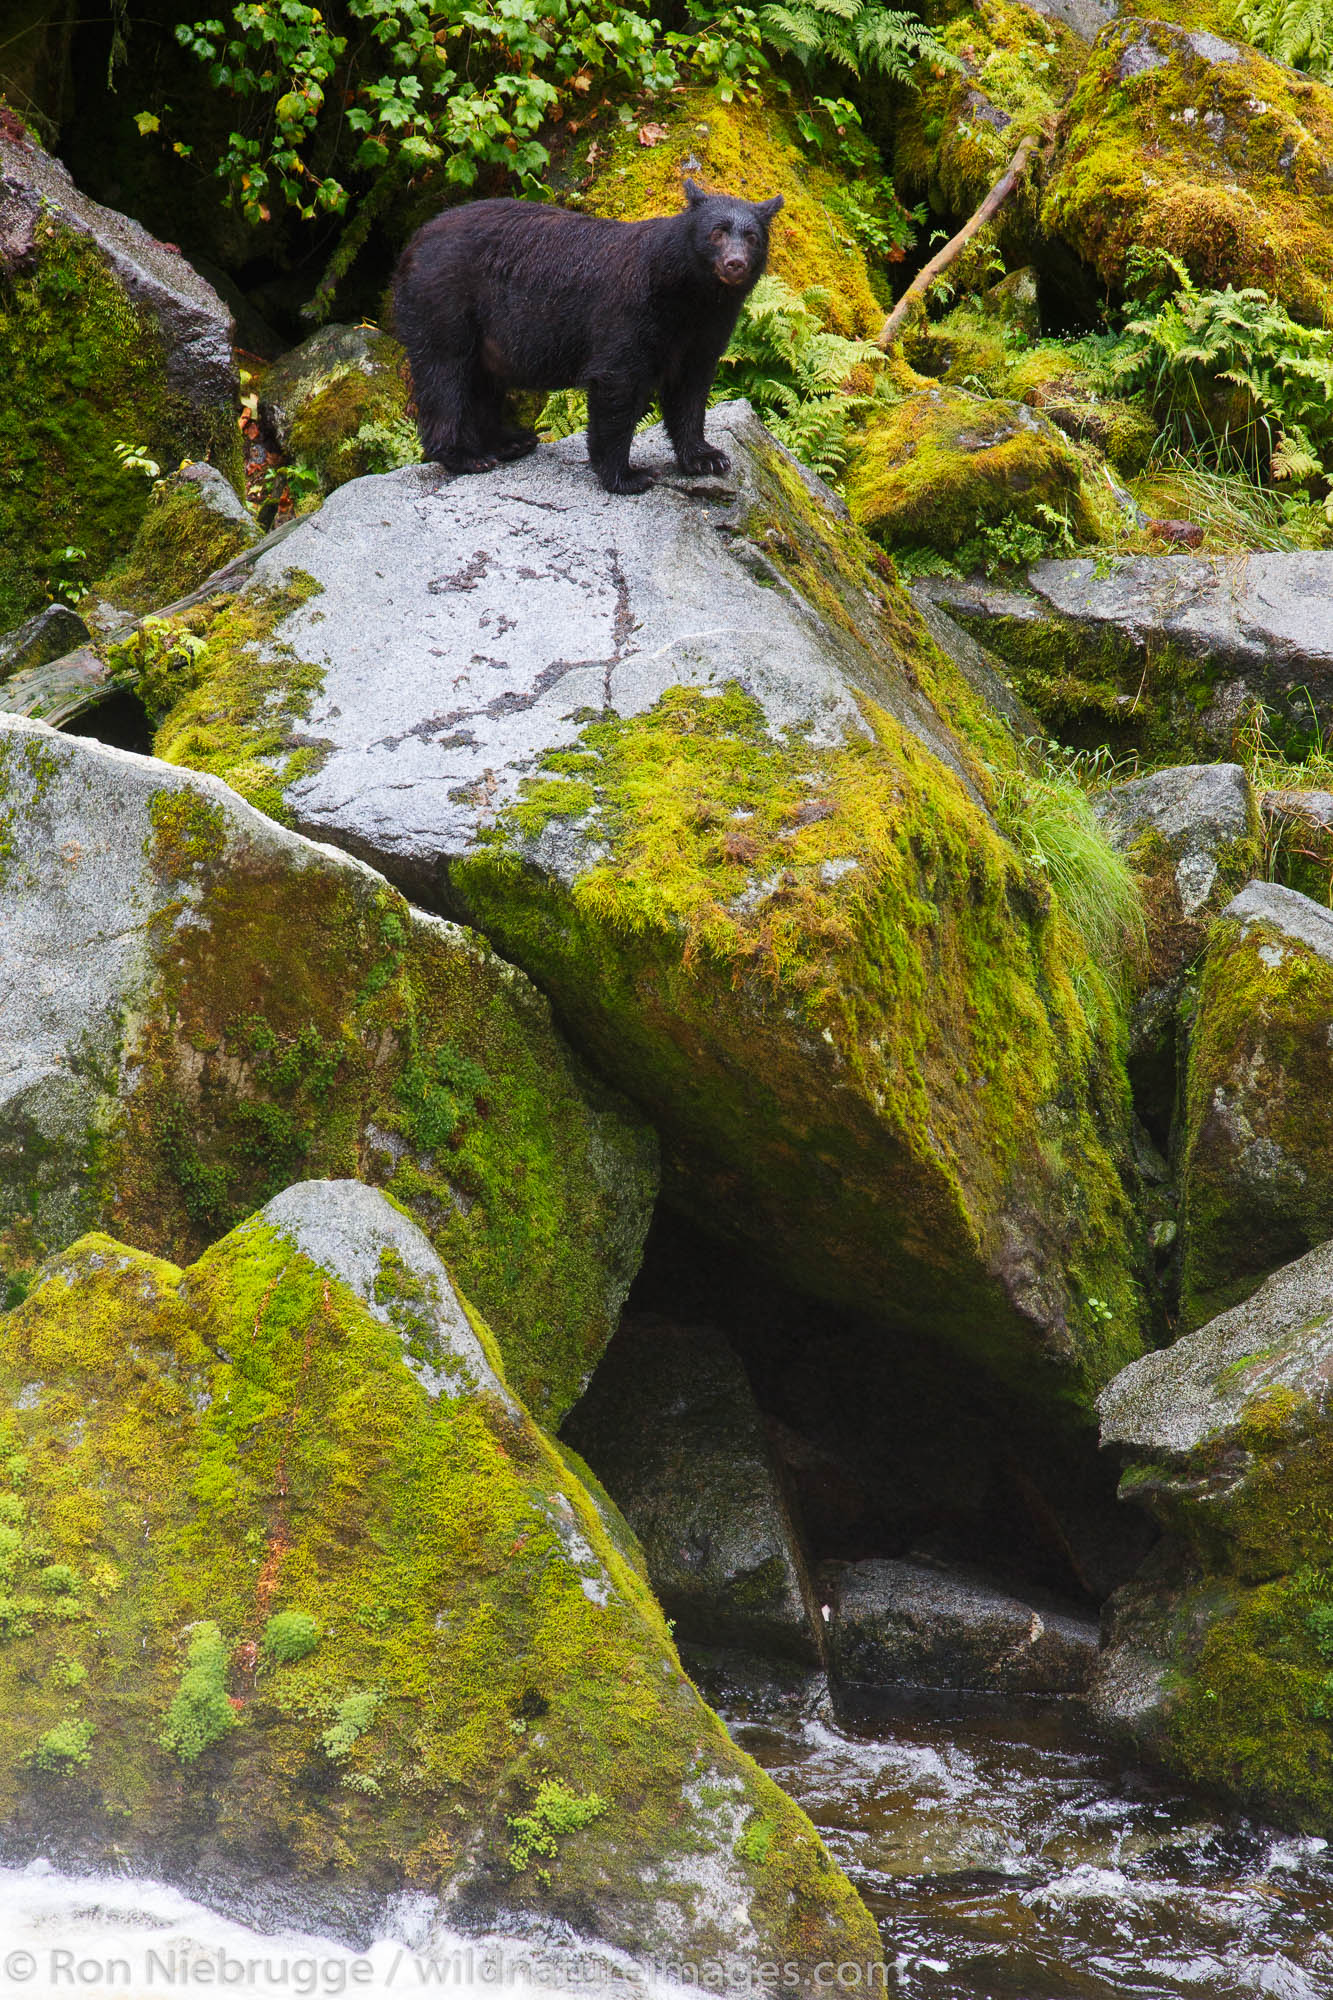 Black bears at the Anan Wildlife Observatory, Tongass National Forest, Alaska.